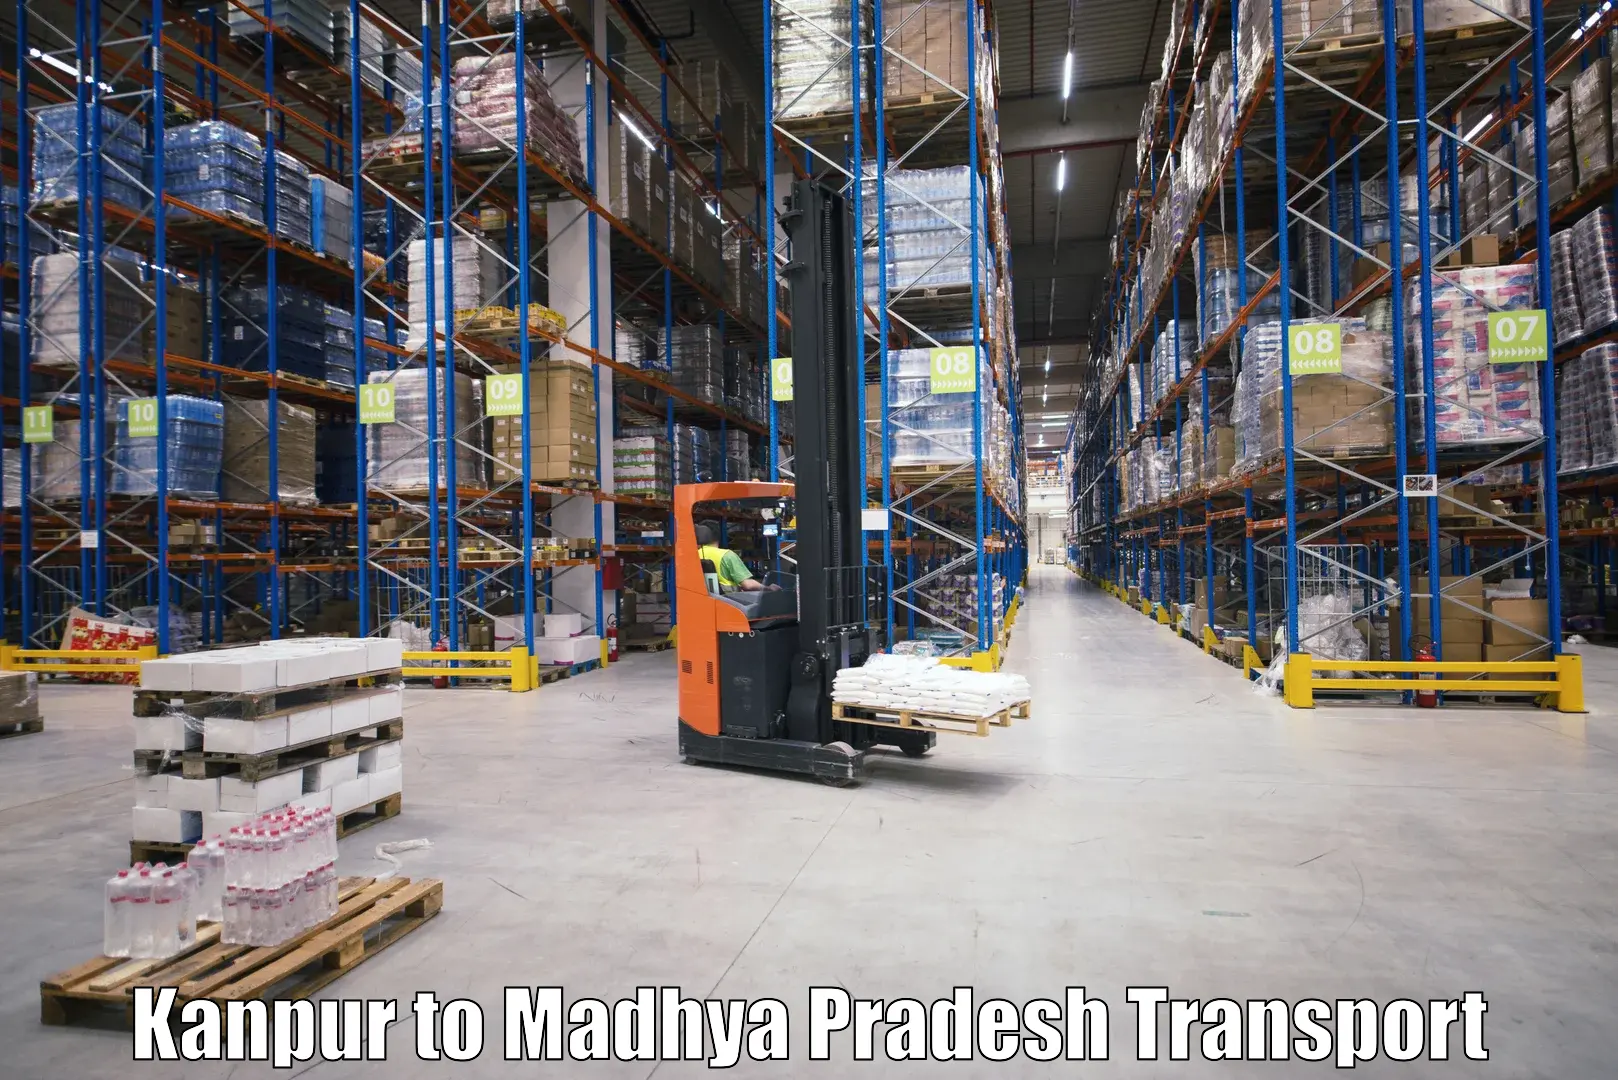 Cargo transportation services in Kanpur to Manawar